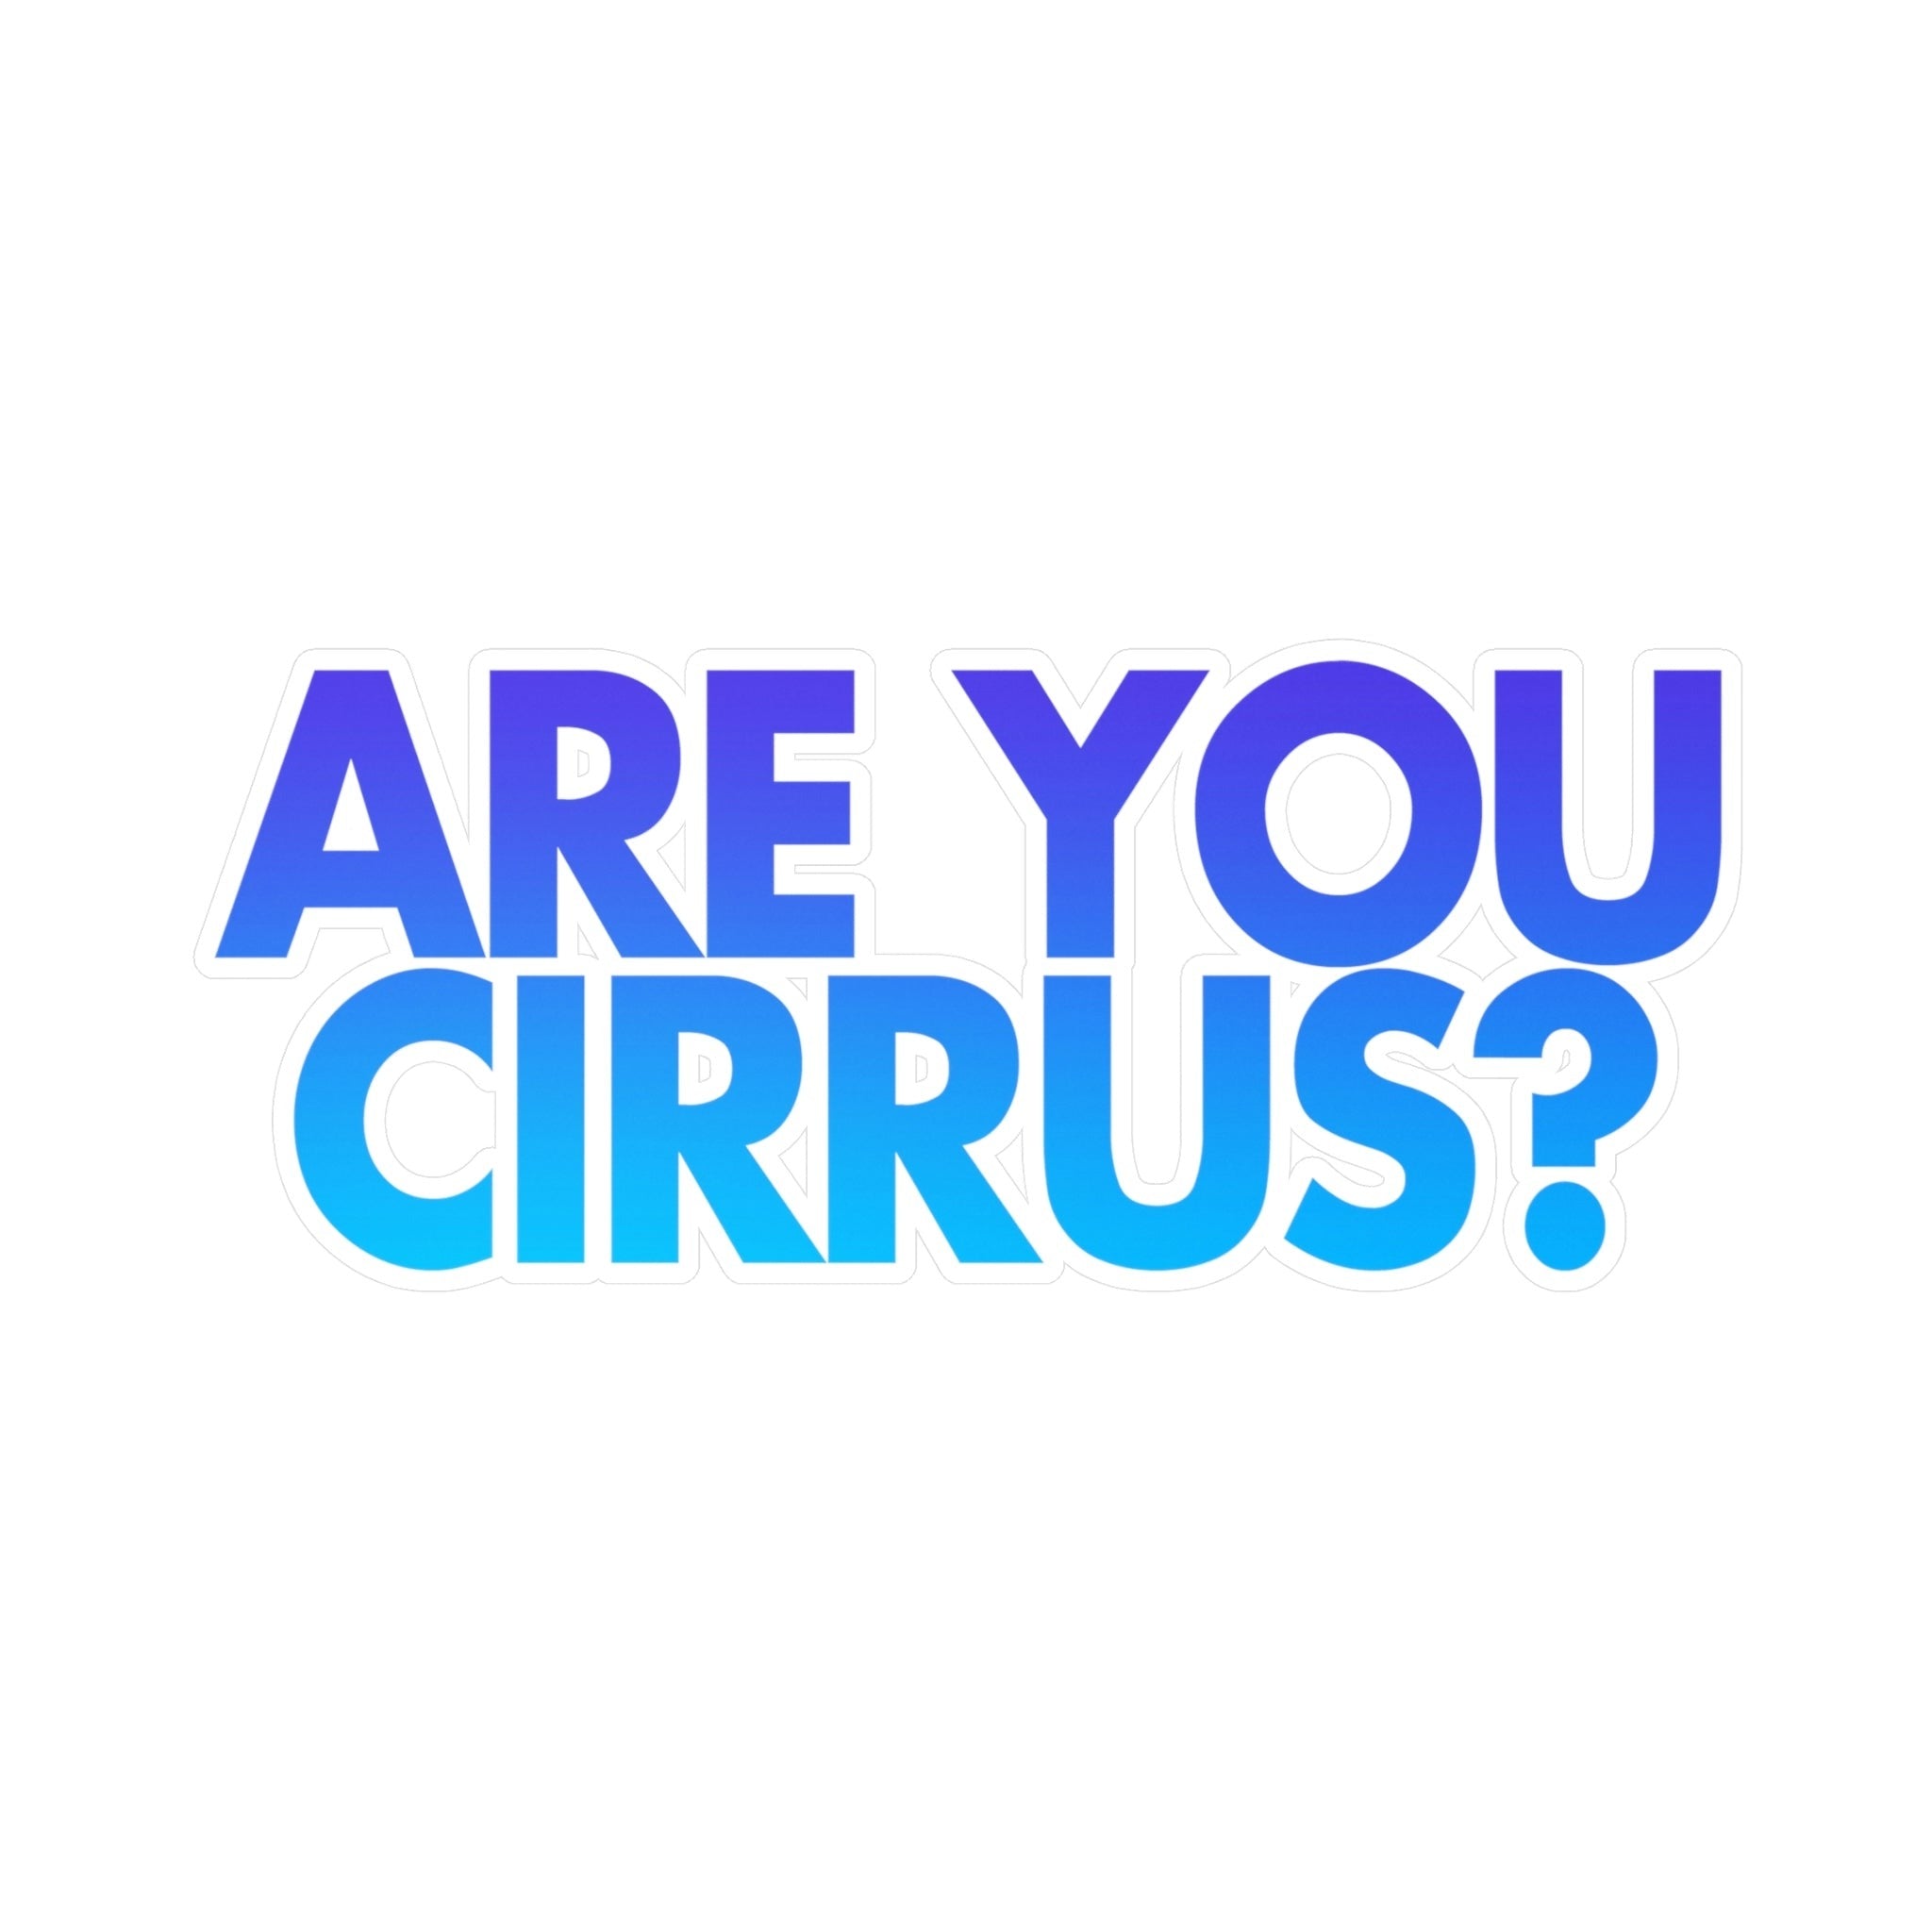 Are You Cirrus? Vinyl Decal 